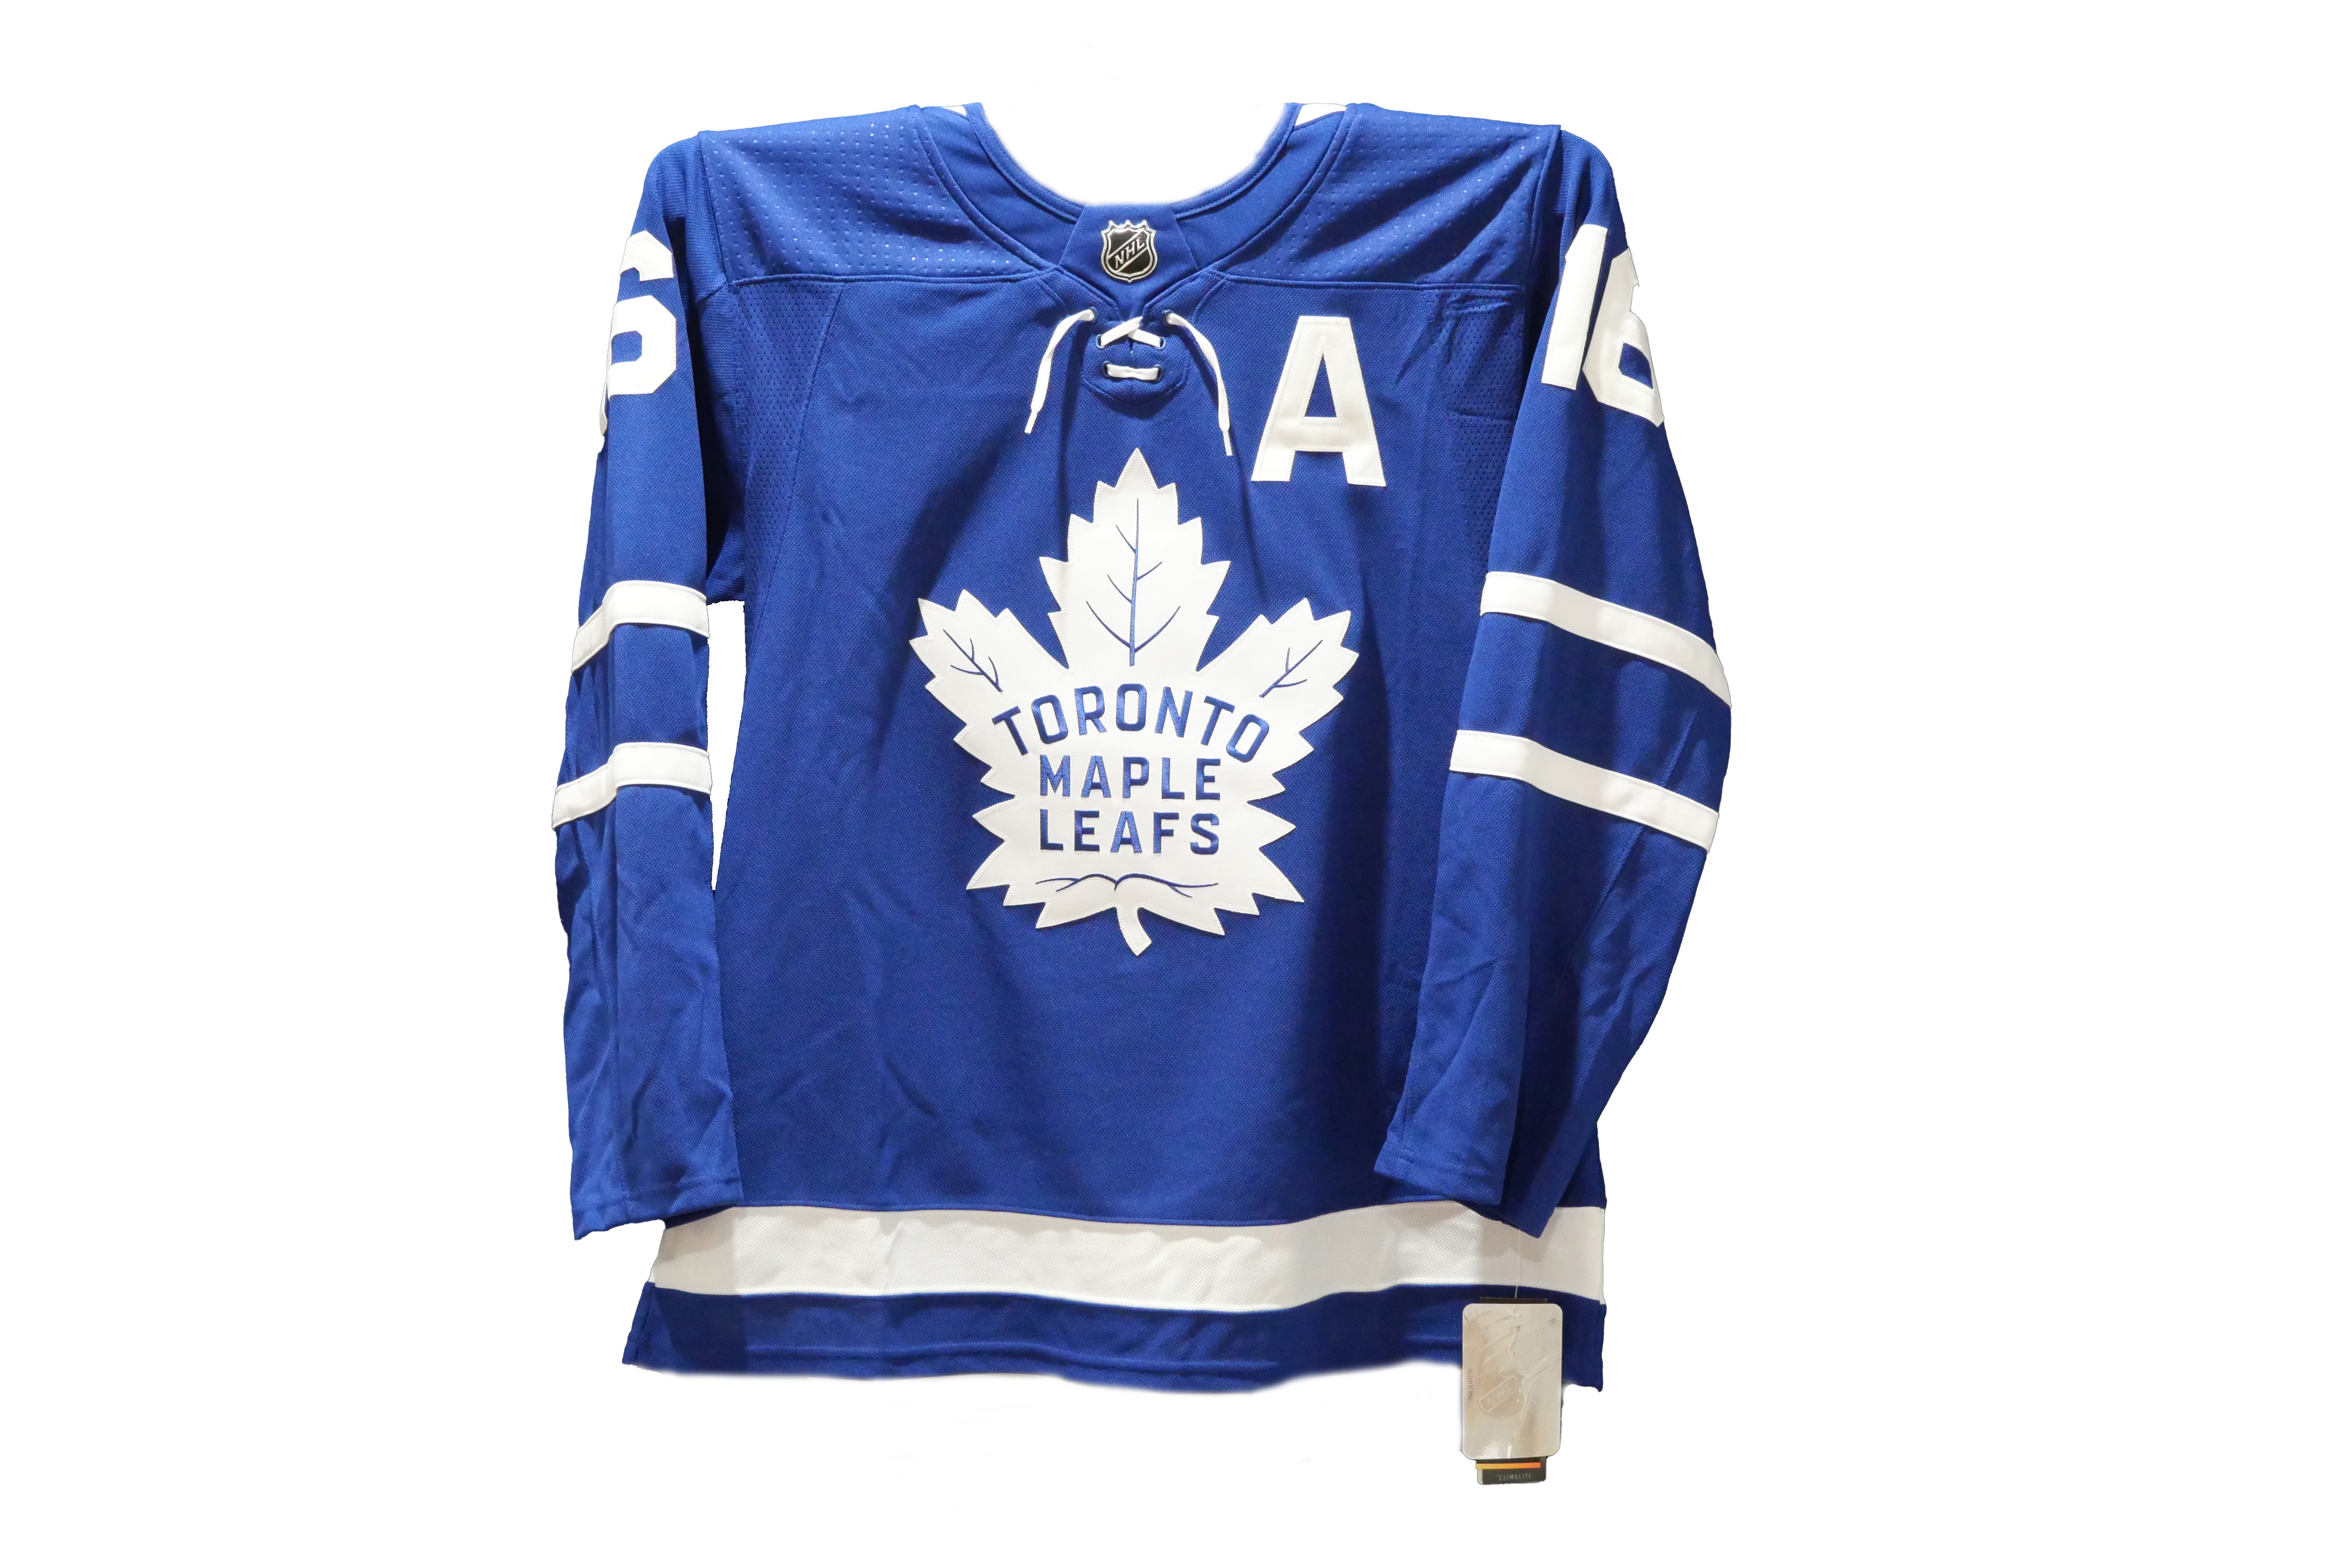 Mitch Marner Signed 2023 NHL All-Star Eastern Conference Adidas Auth. Jersey